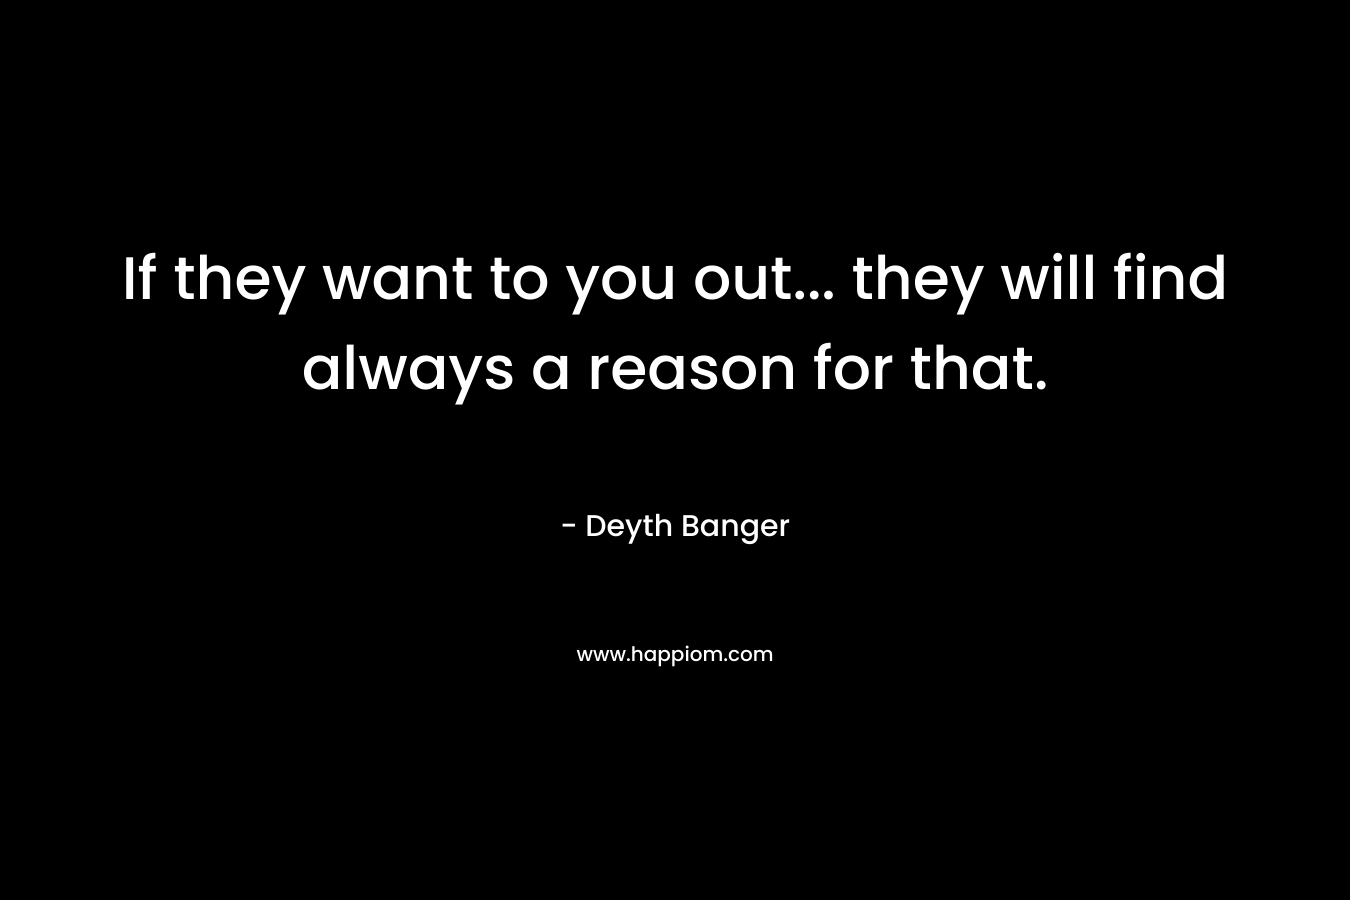 If they want to you out... they will find always a reason for that.